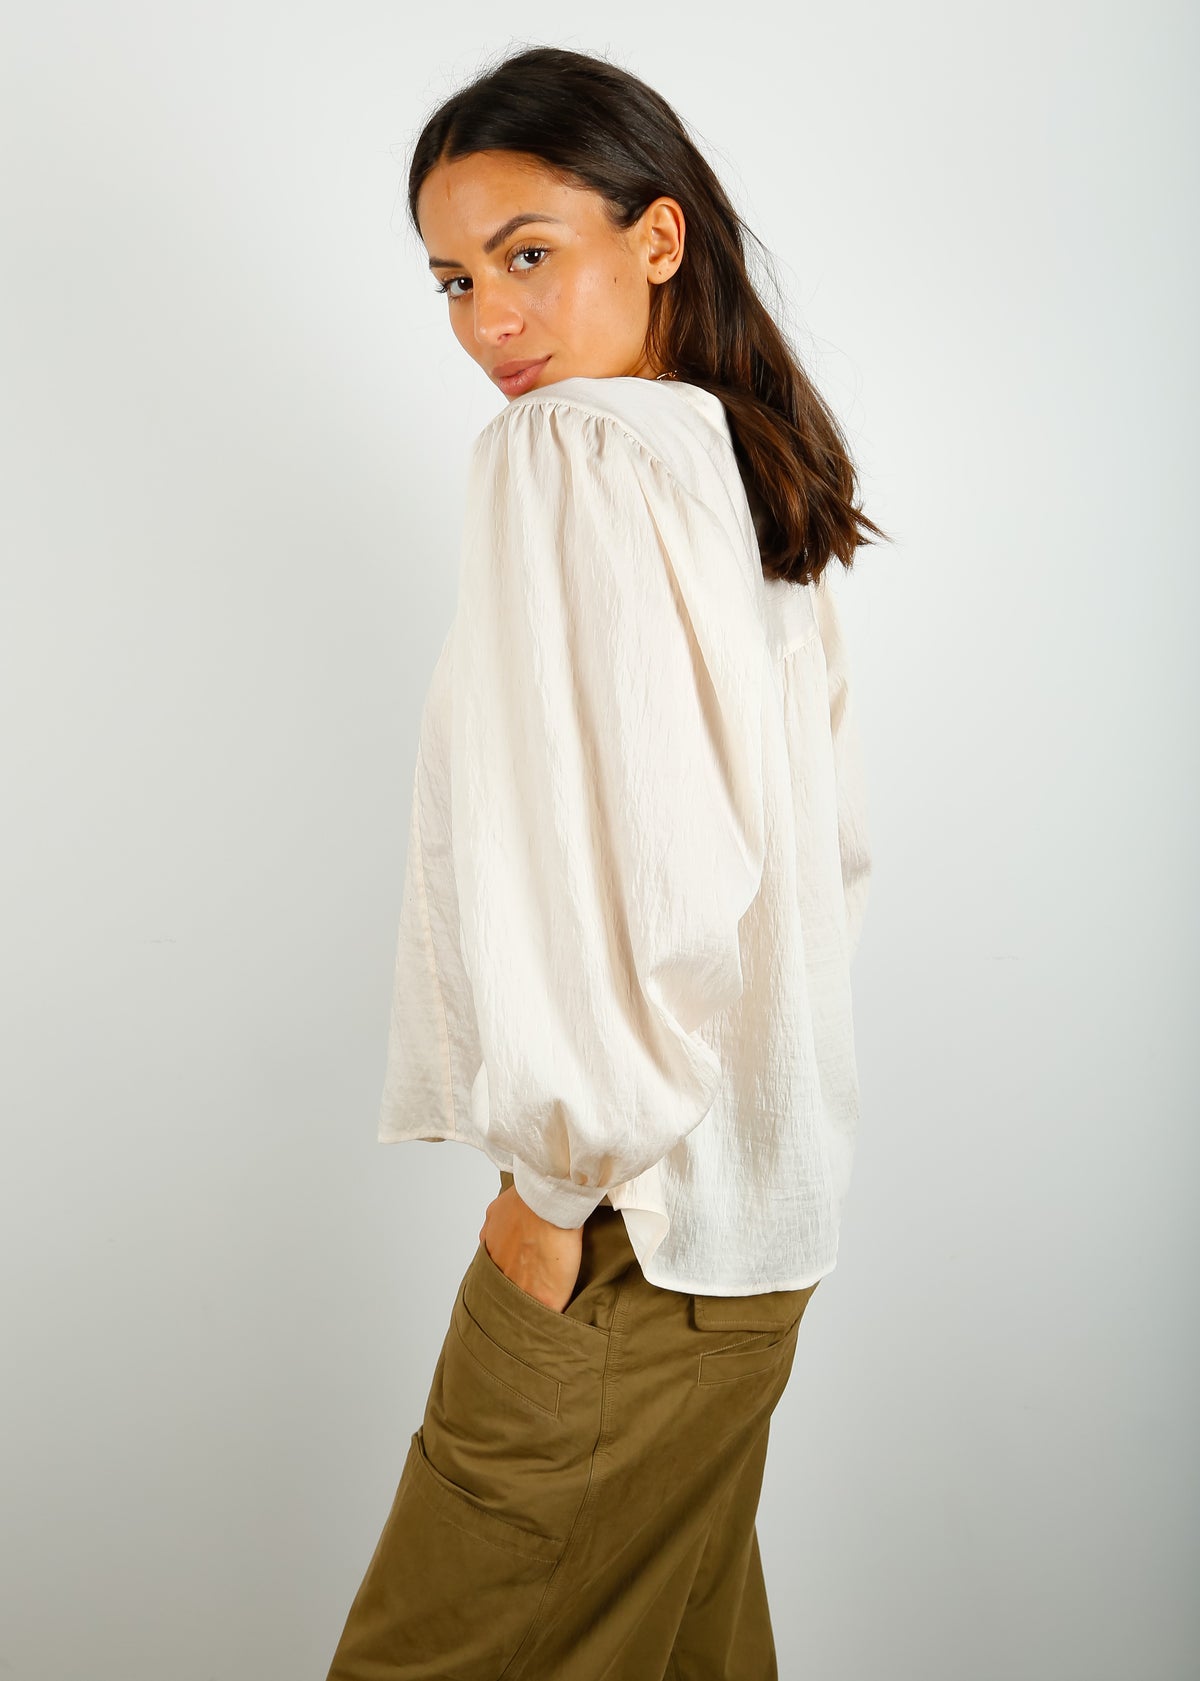 RAILS Fable Shirt in Lotus